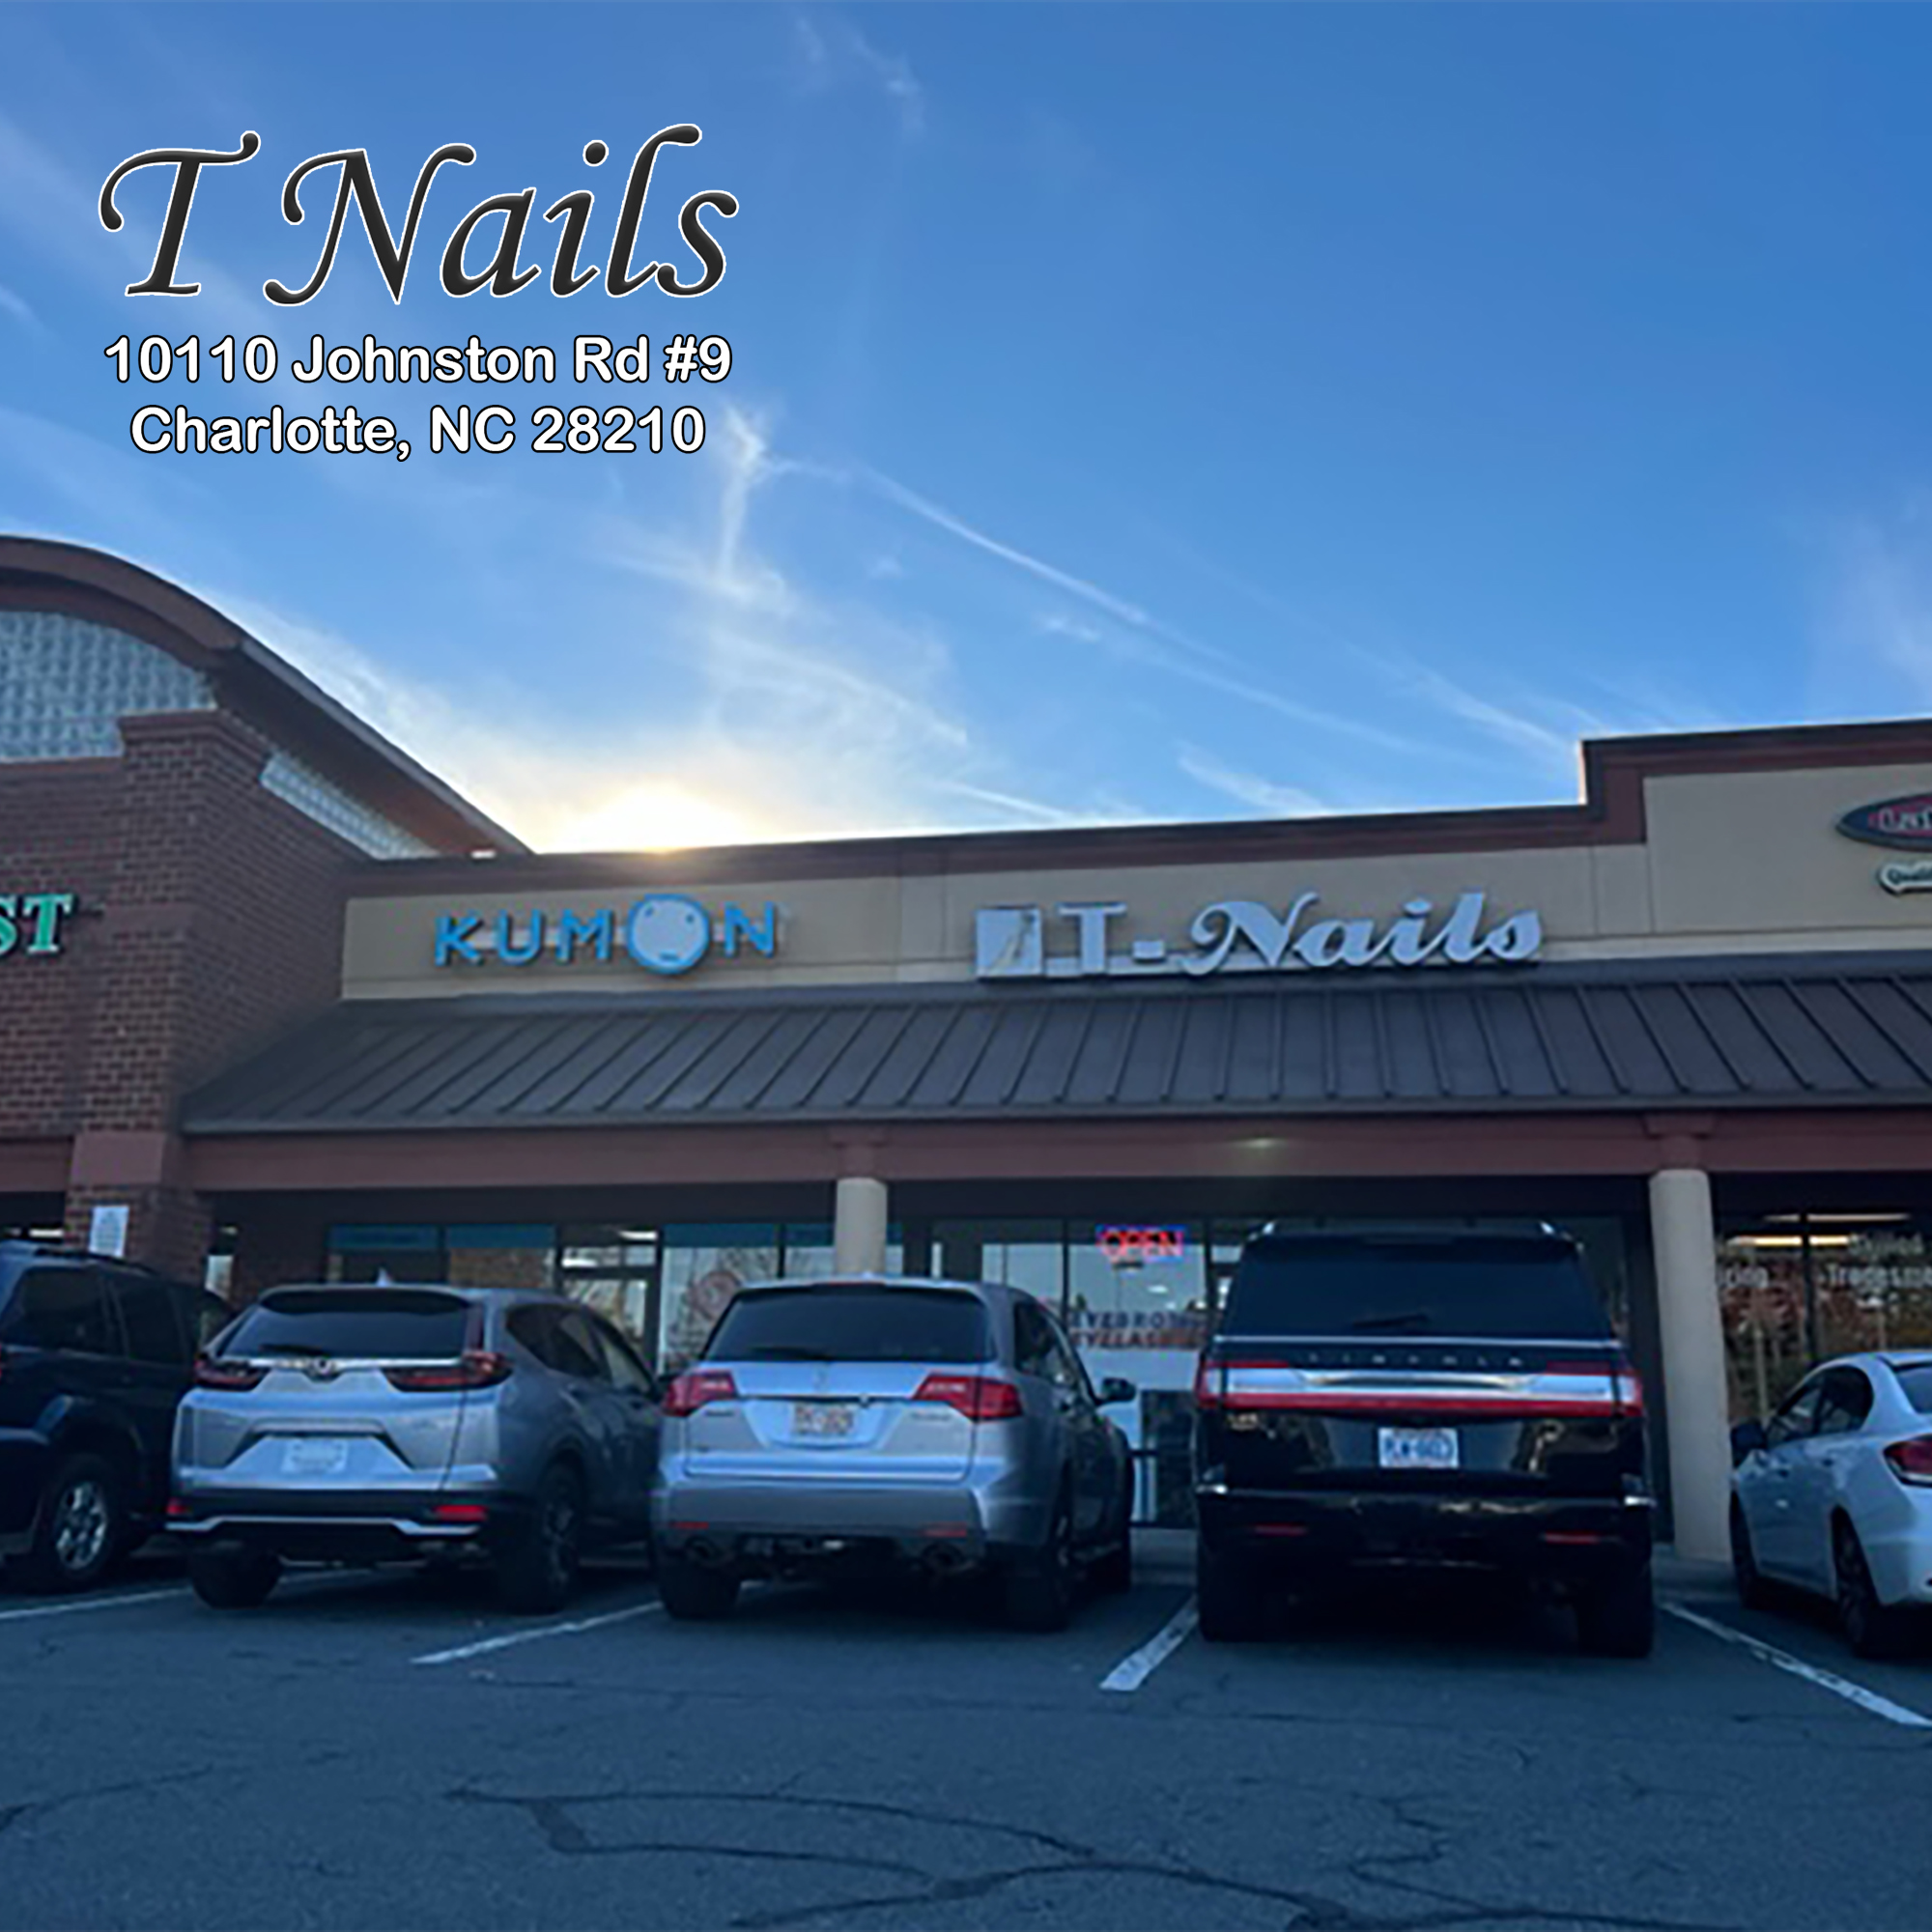 The new destination to enhance your nail in Charlotte, NC 28210